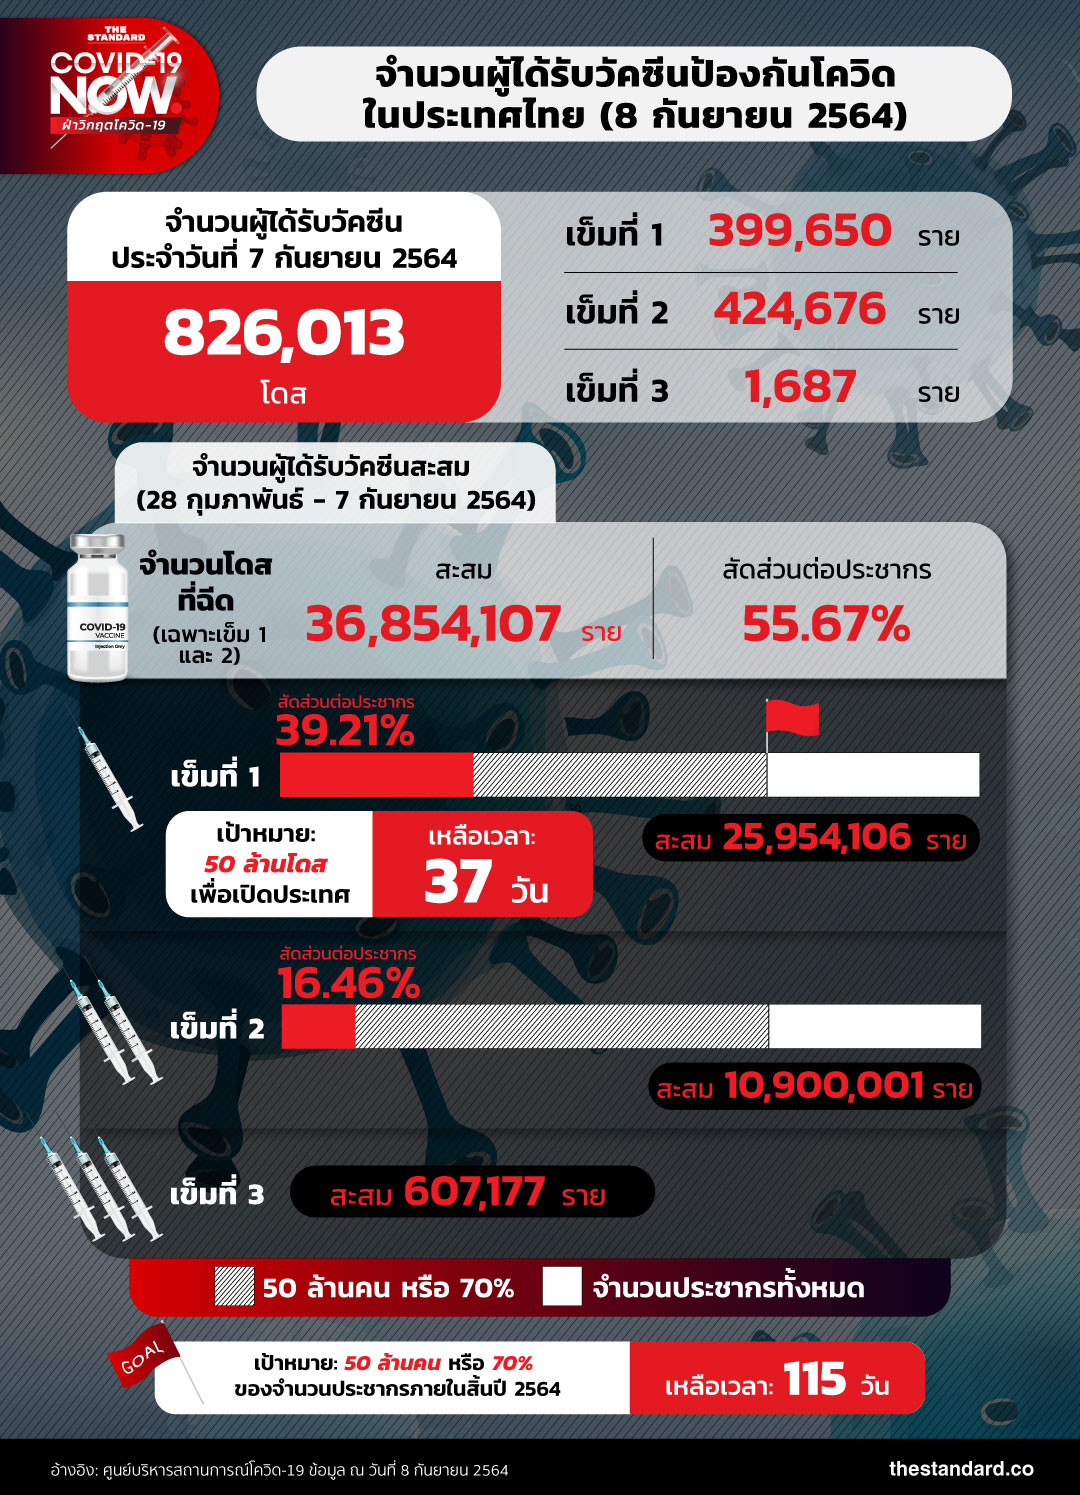 number-of-people-got-covid-19-vaccines-in-thailand-080964